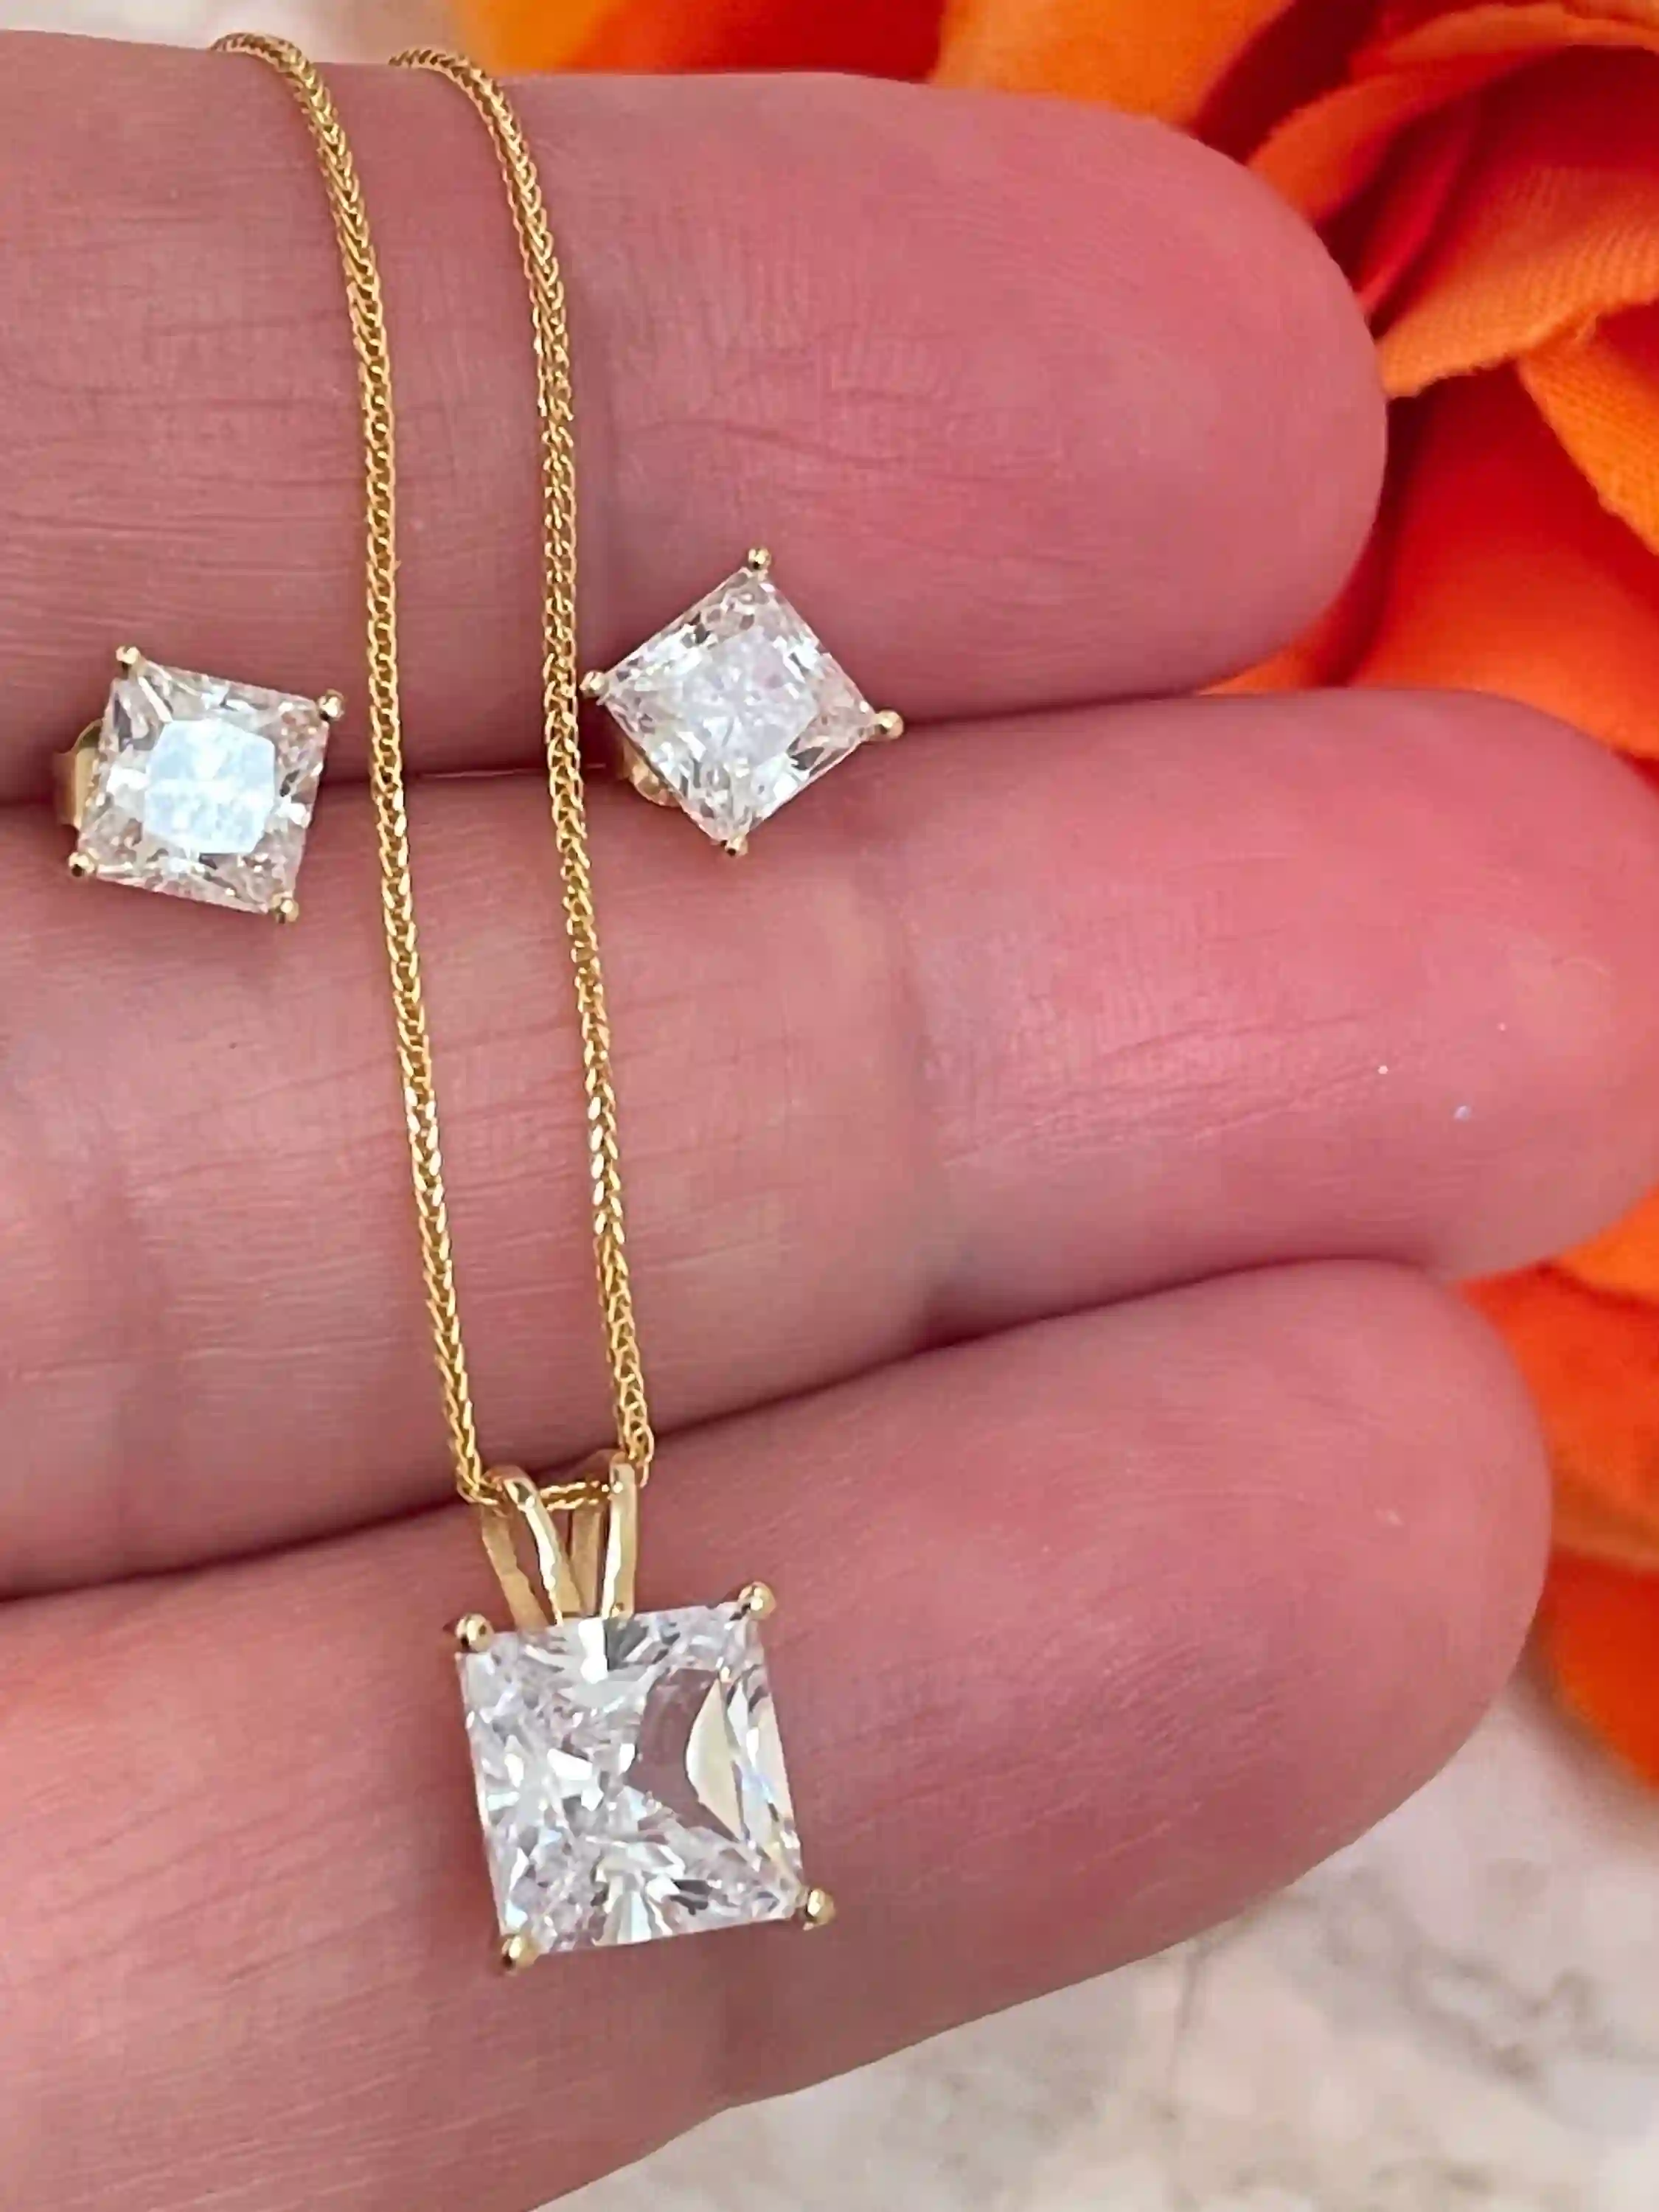 3.5ct - Solid 18k Gold Diamond Necklace Square Pendant Solitaire Earrings Diamond Stud Lab Created Diamond Jewelry SET Anniversary wife gift 